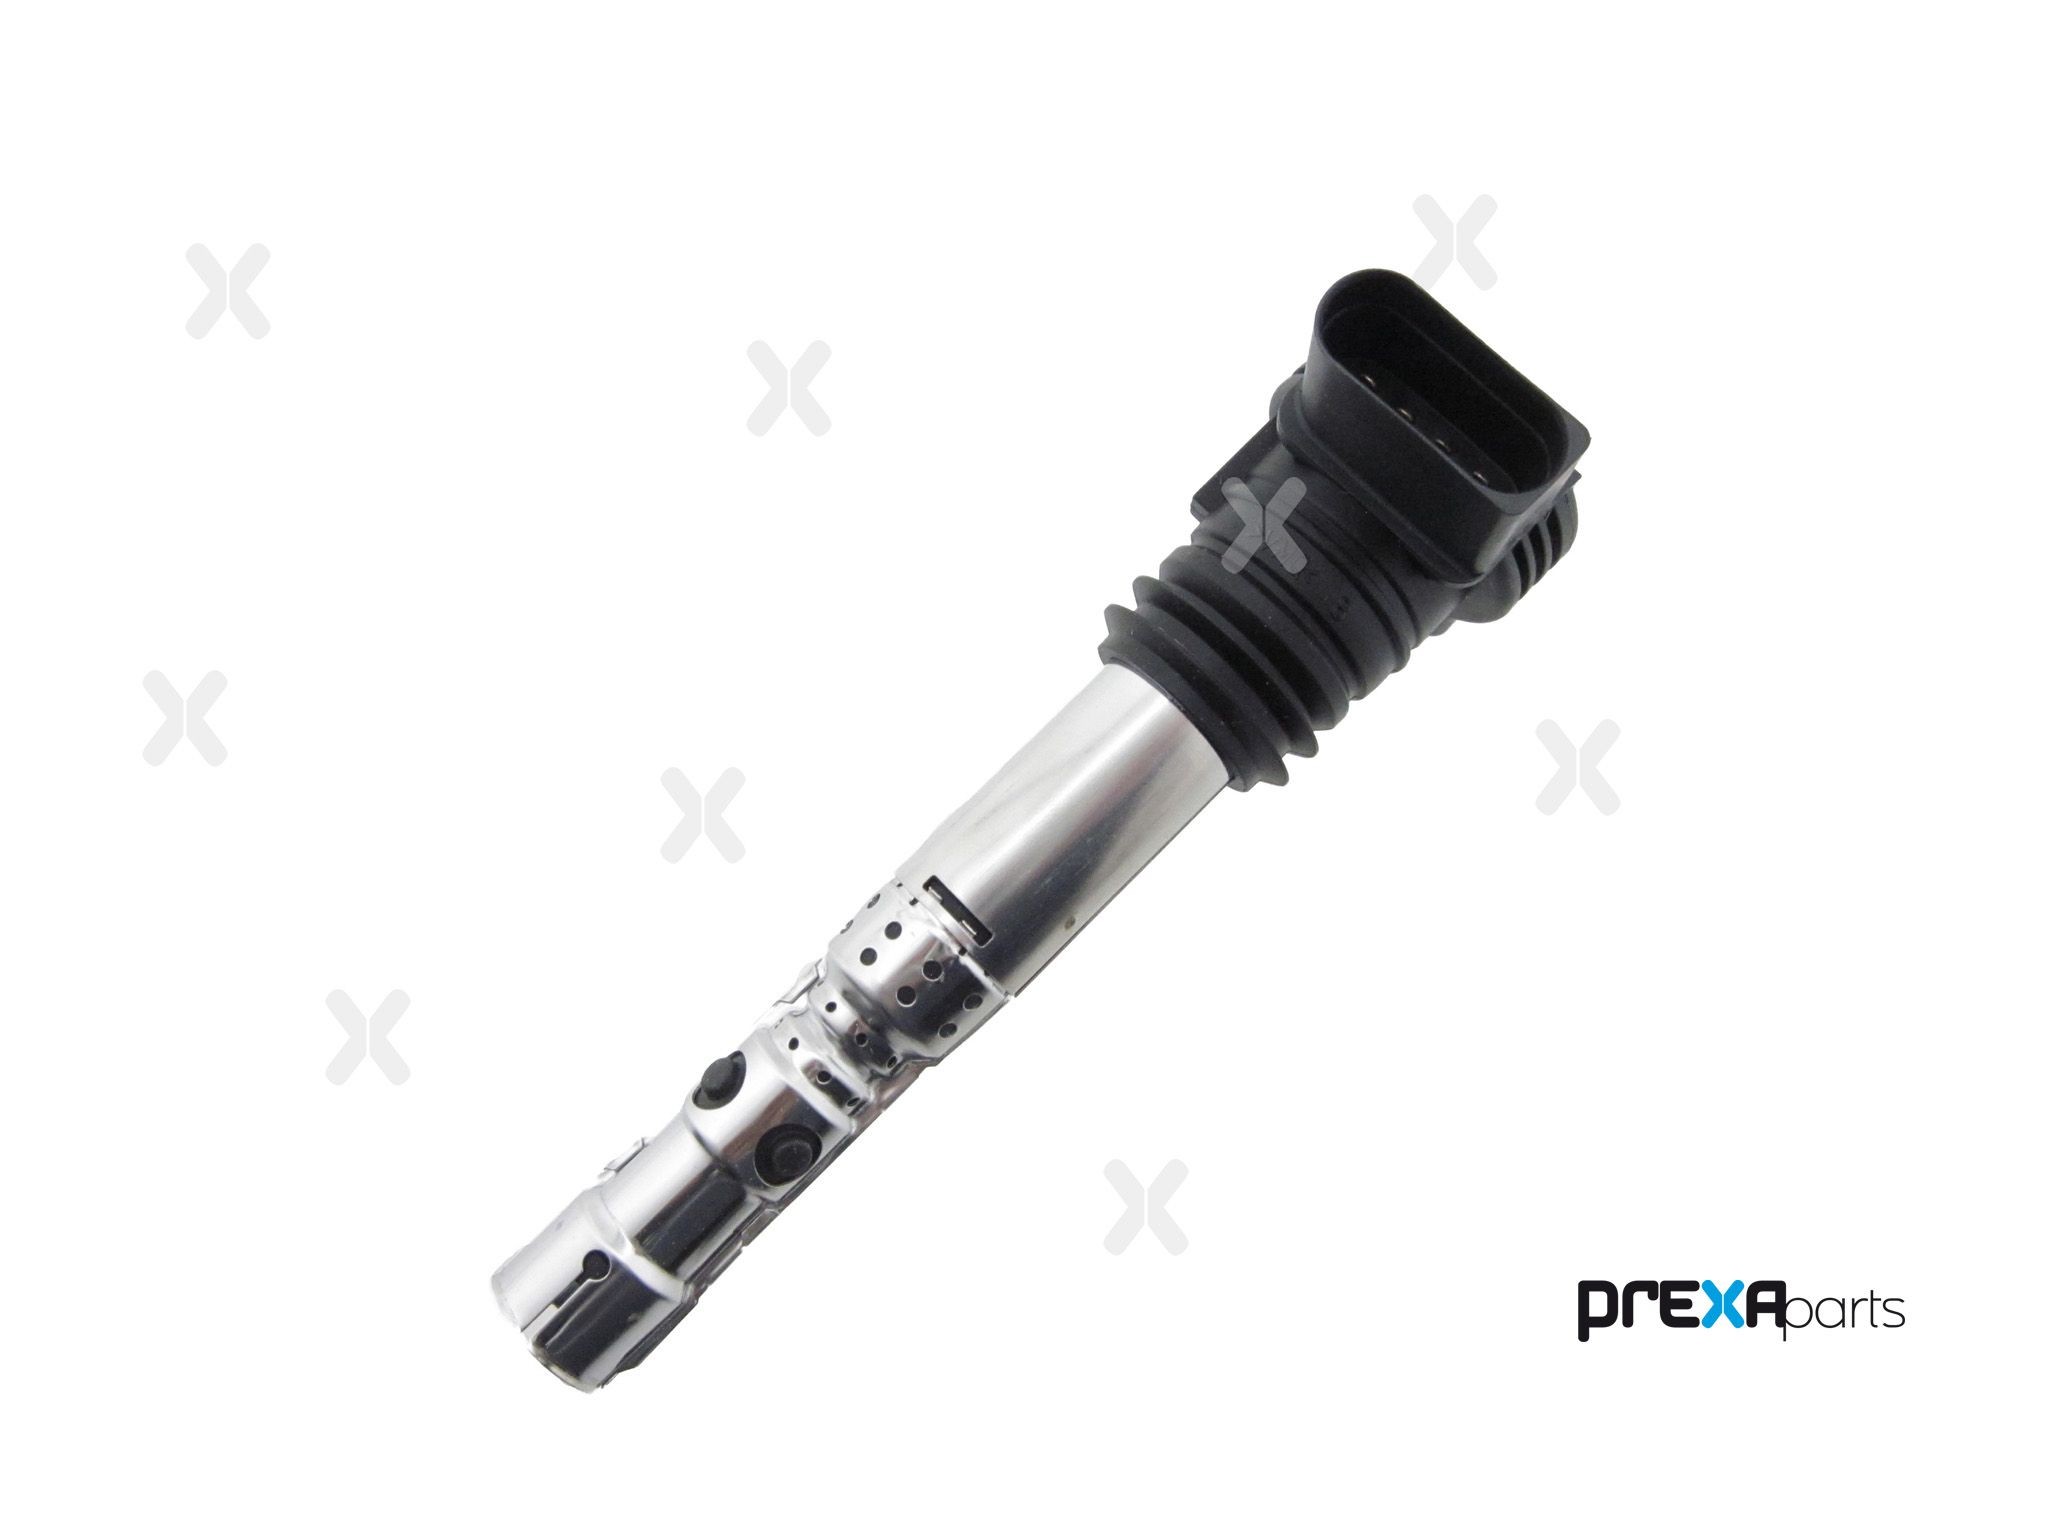 Original P106001 PREXAparts Ignition coil experience and price